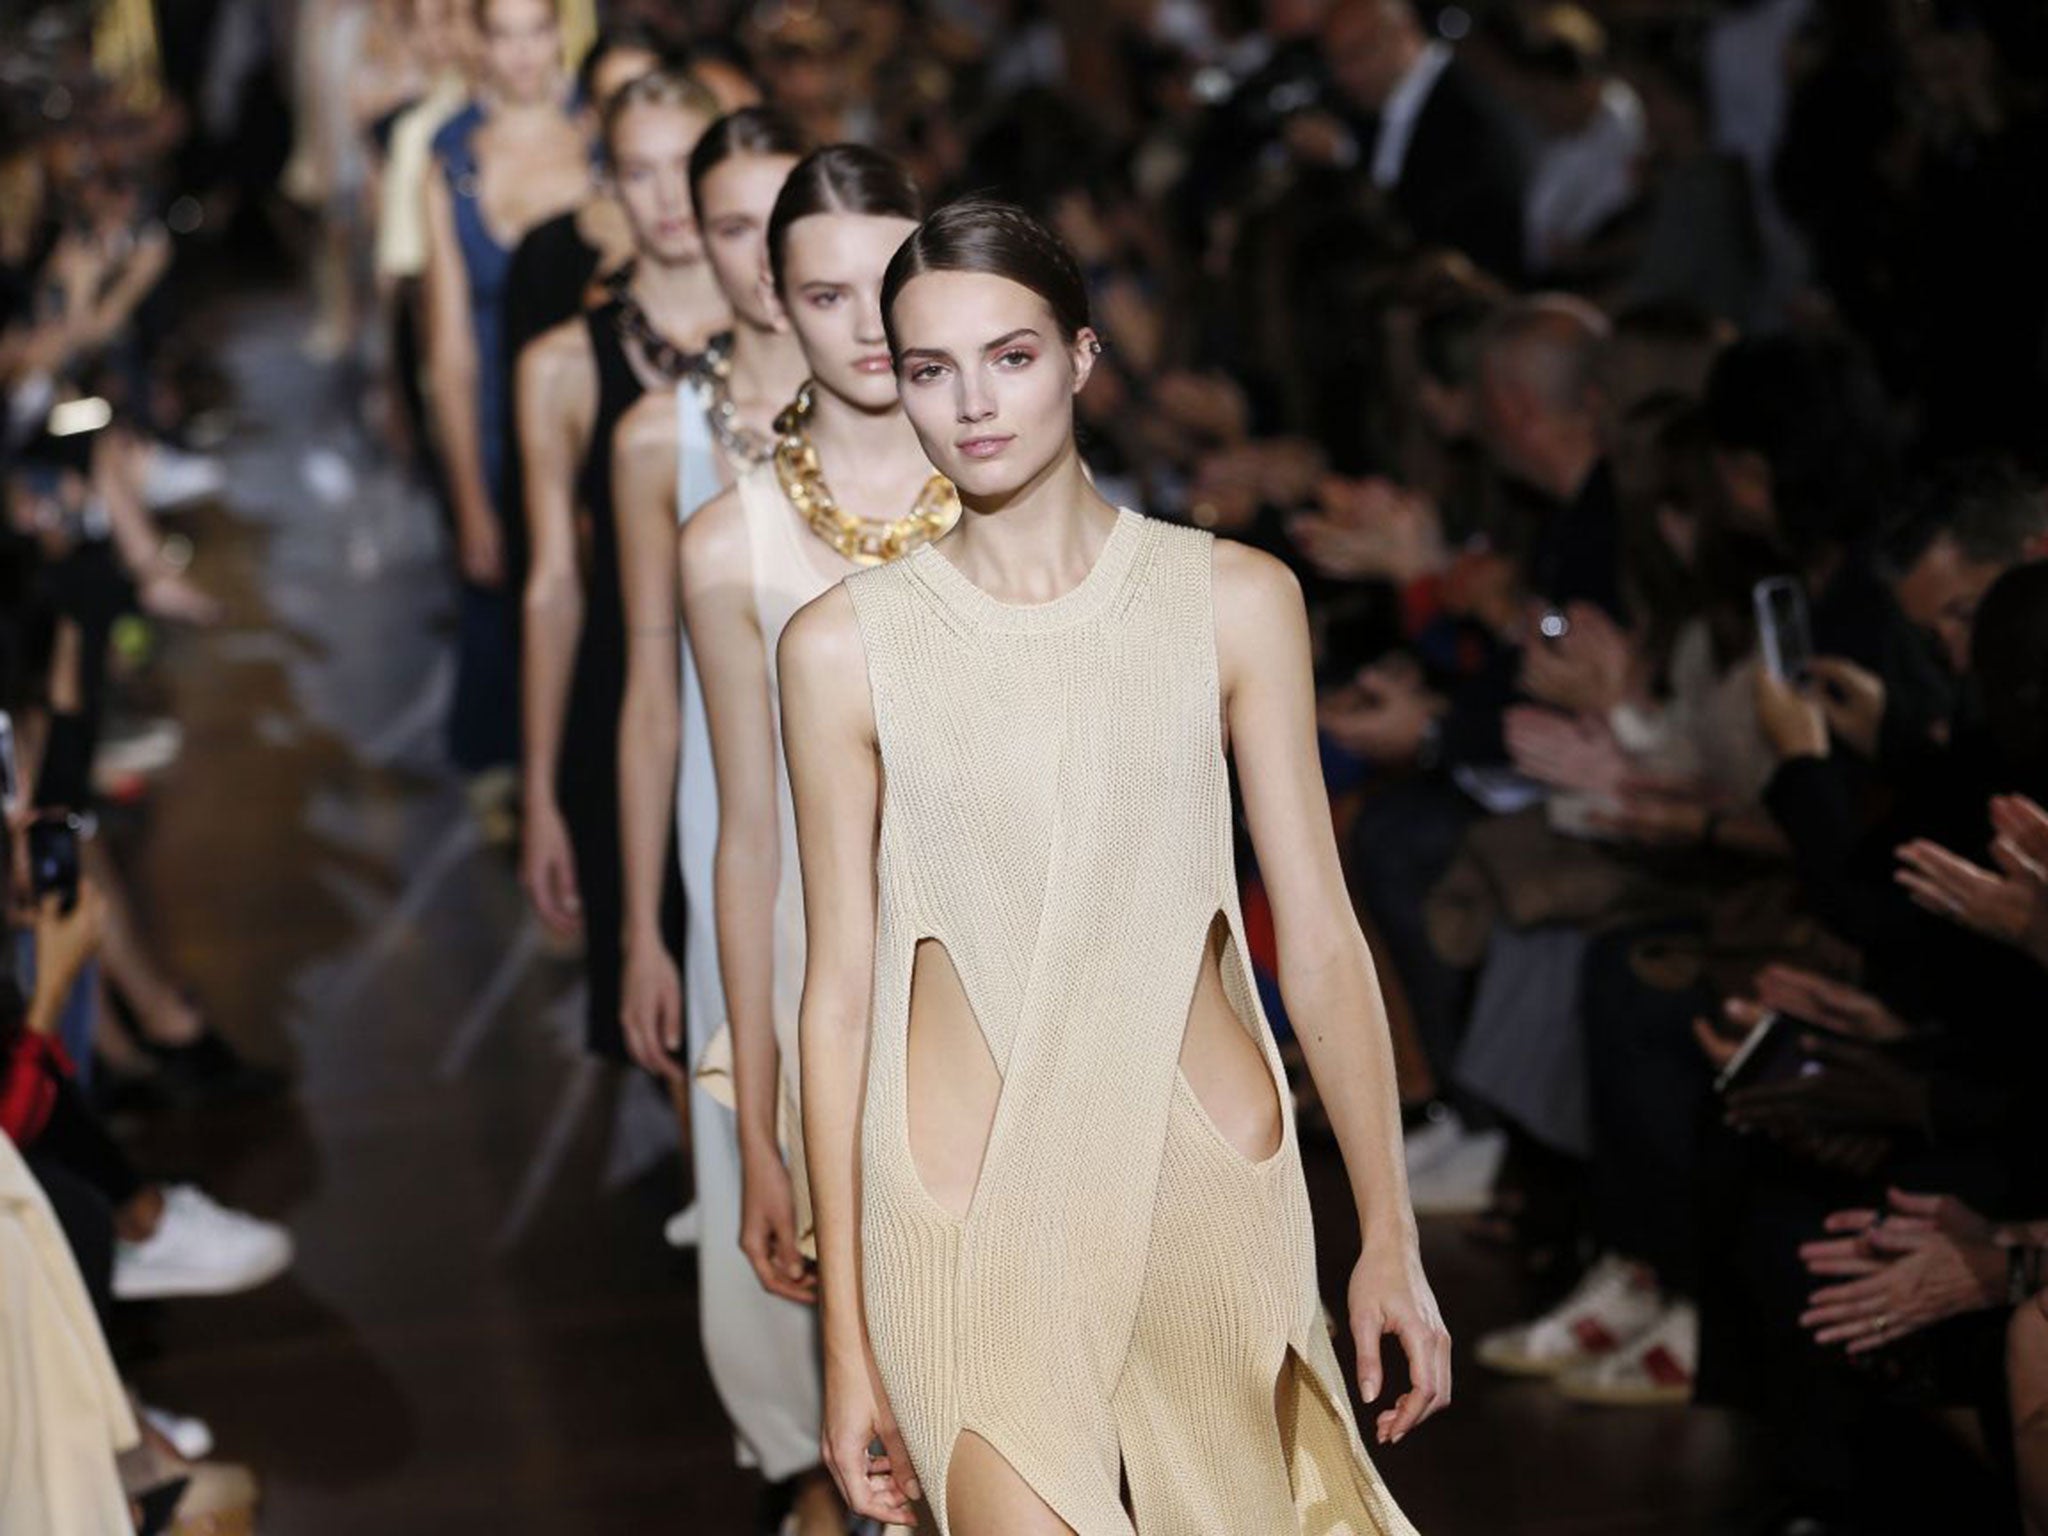 Stella McCartney models on the runway yesterday in Paris Fashion Week’s Womens- wear spring/summer 2015 collections